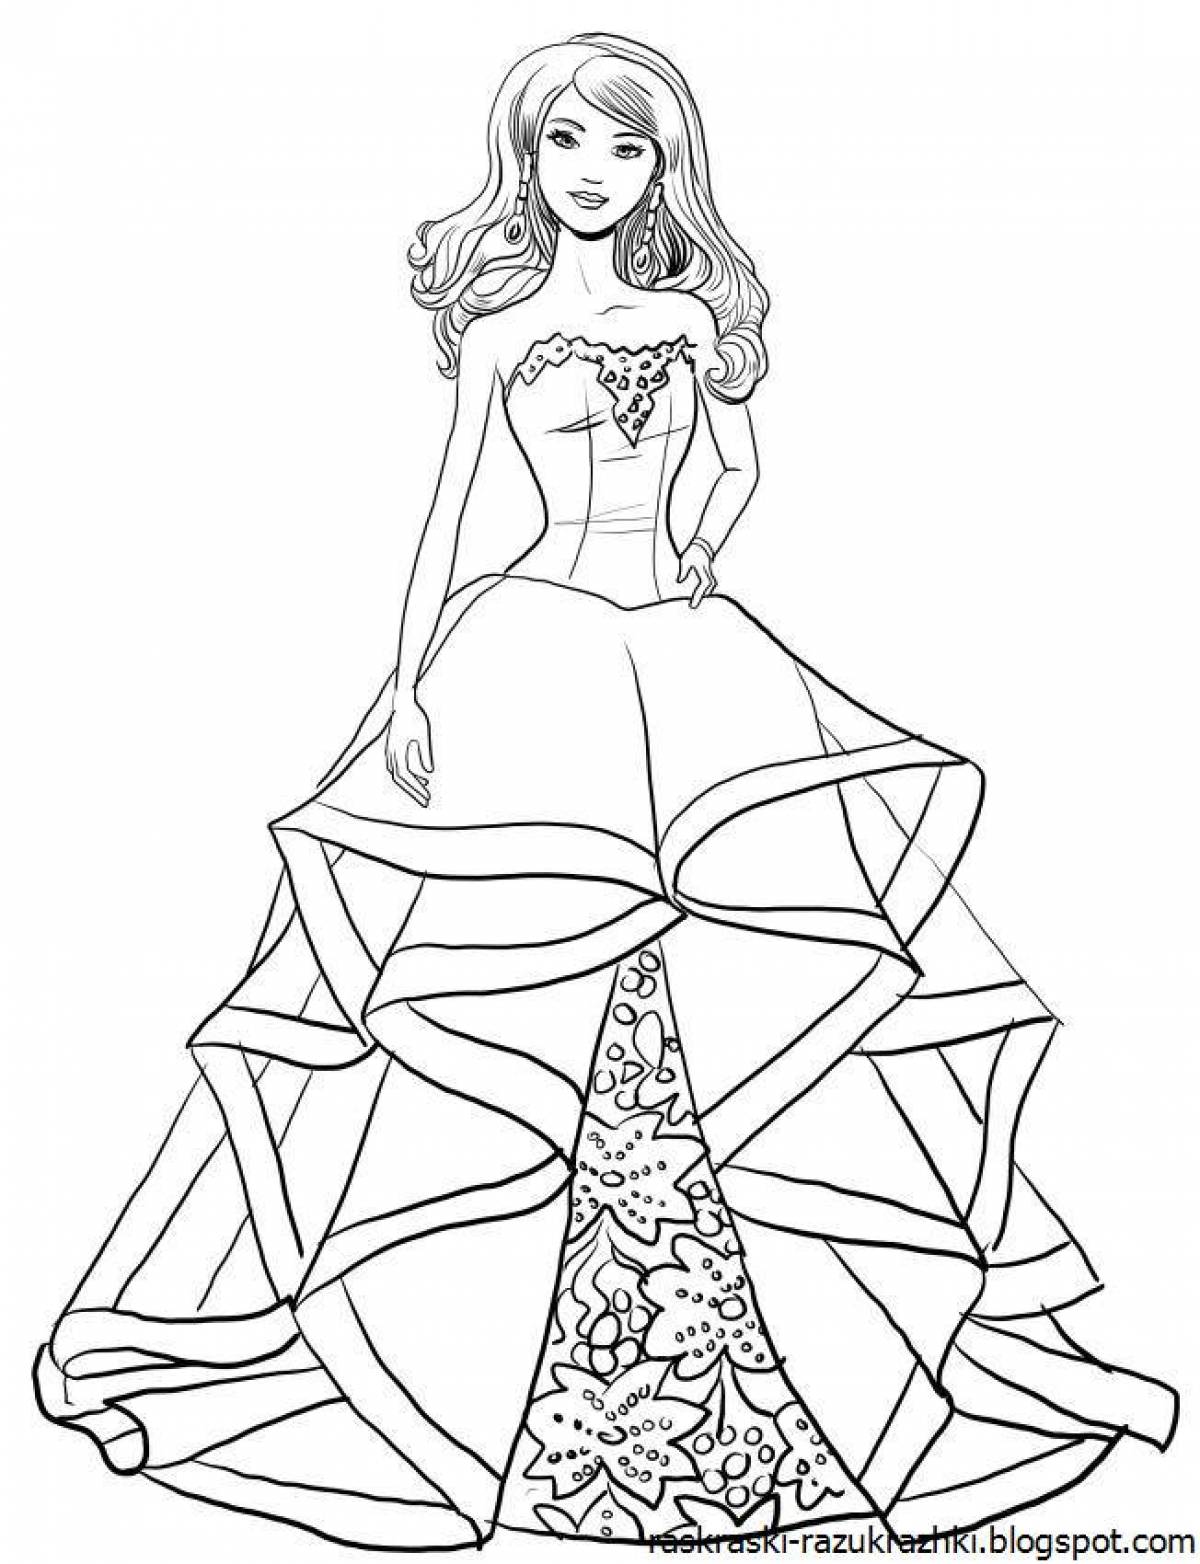 Wonderful princess coloring pages in beautiful dresses